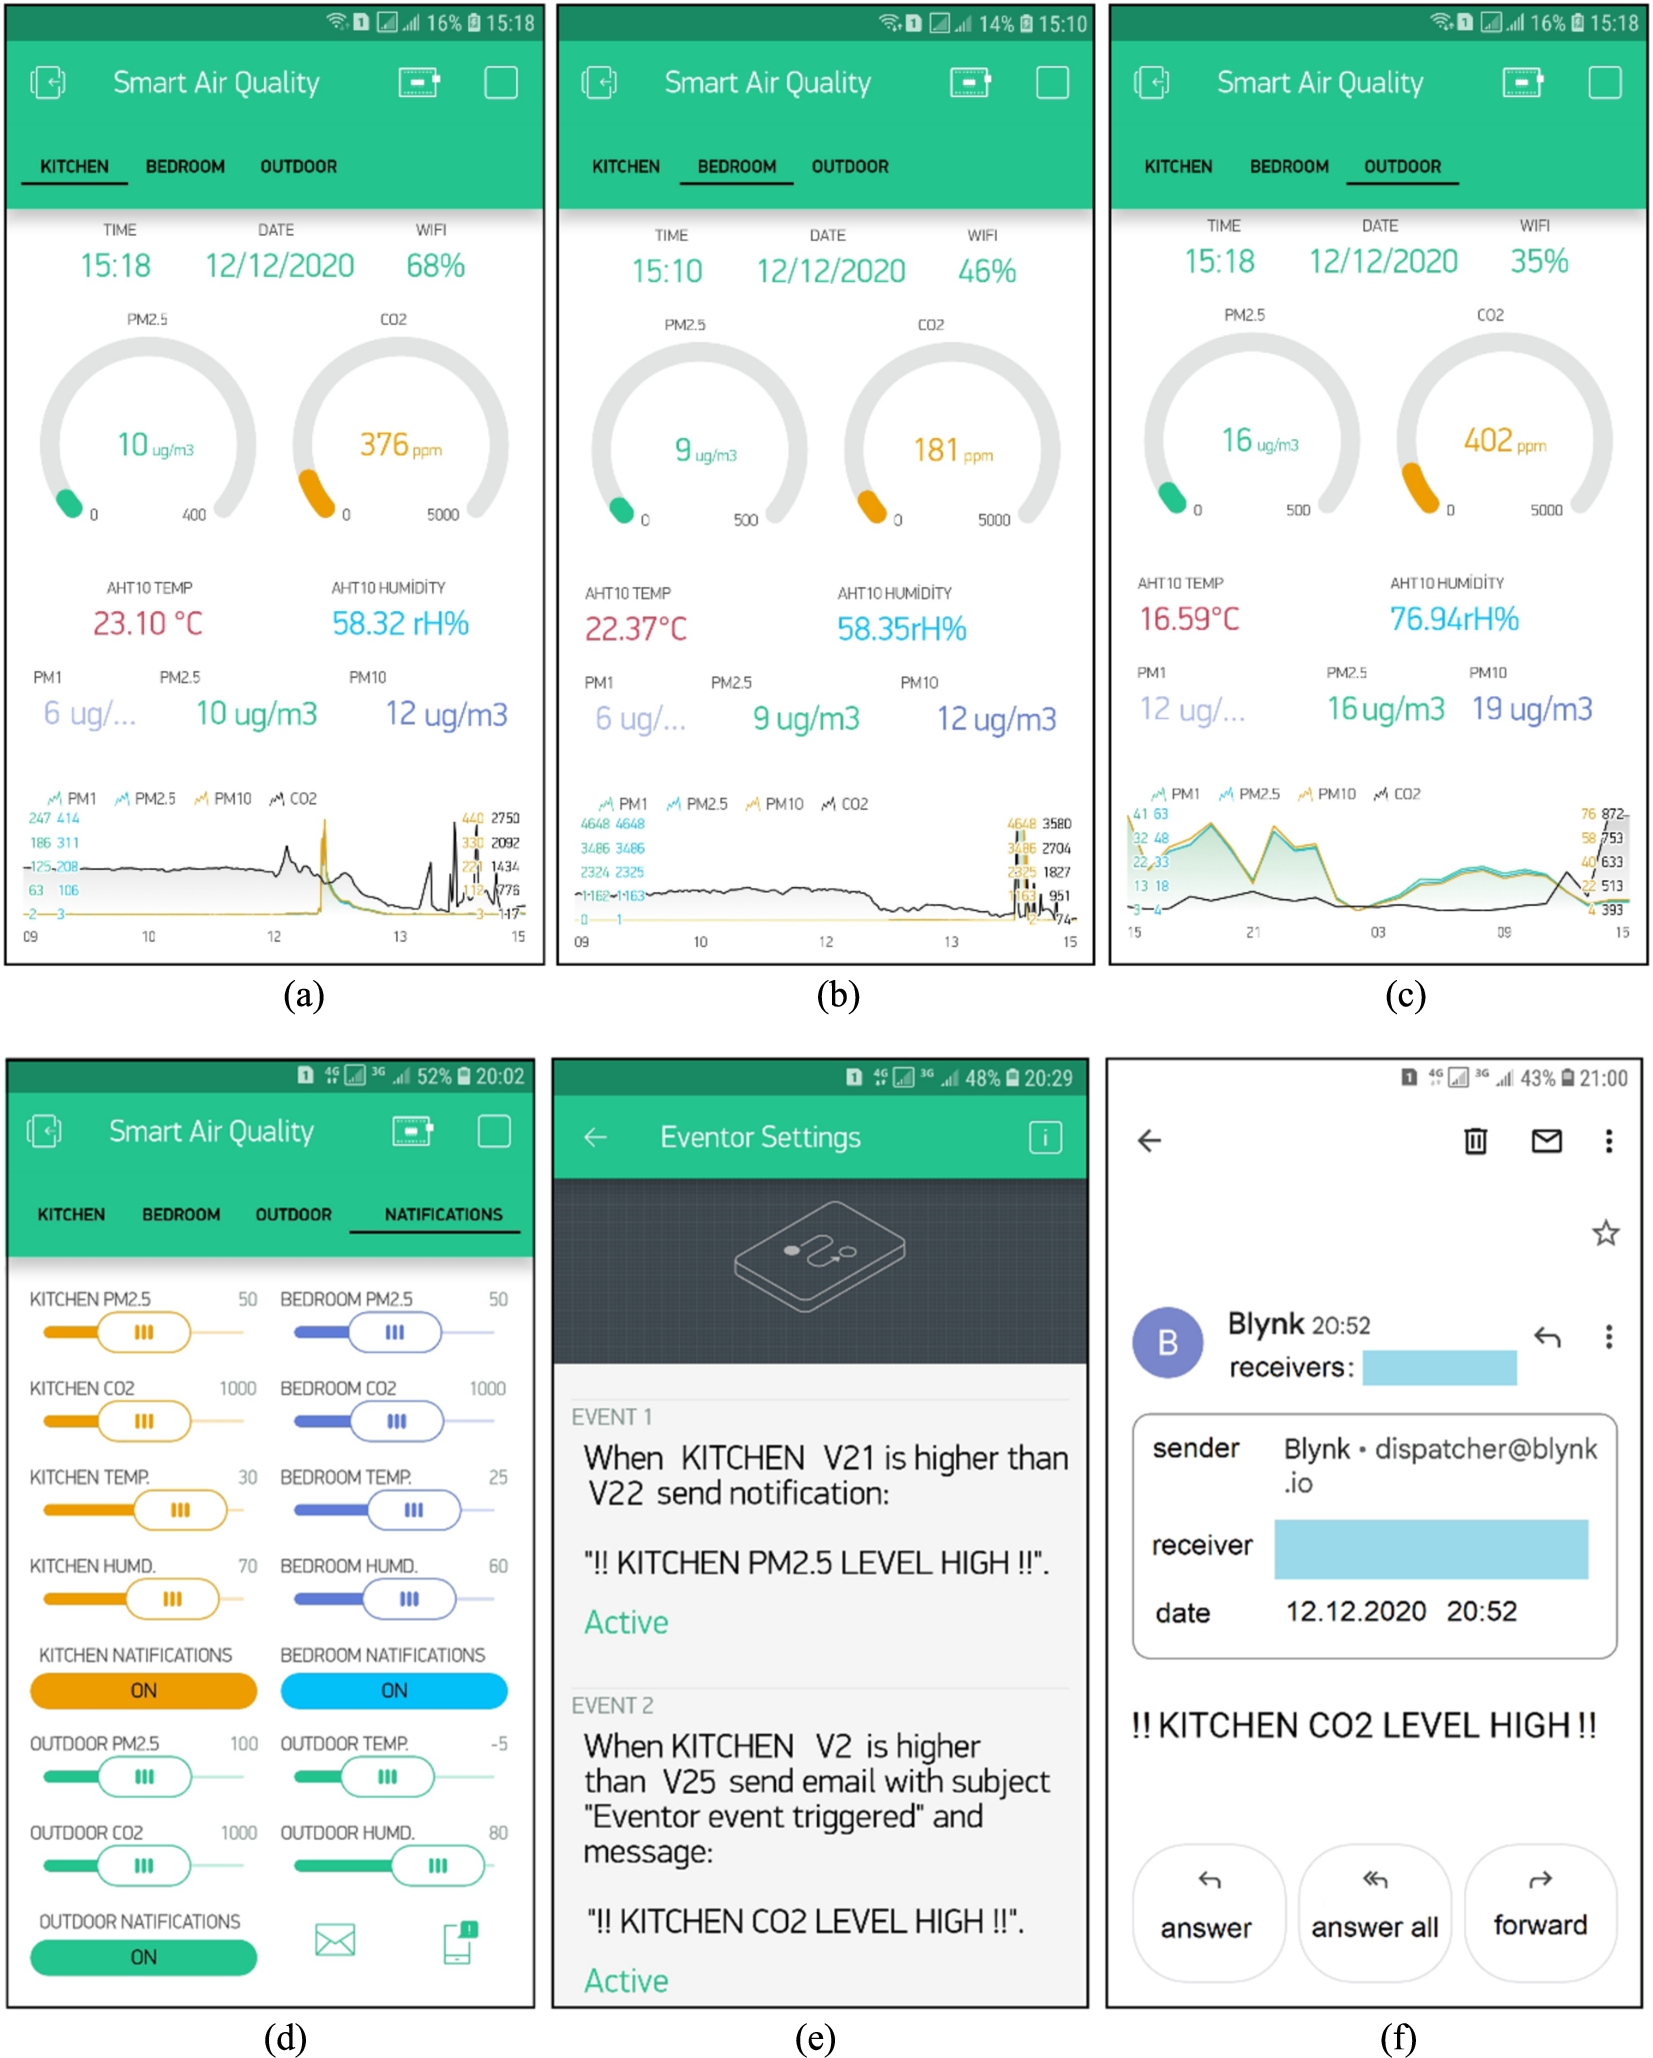 The user interface of the air quality measurement device (a) kitchen, (b) bedroom, (c) outdoor, (d) notification setup, (e) eventor setup, (f) mail notification.